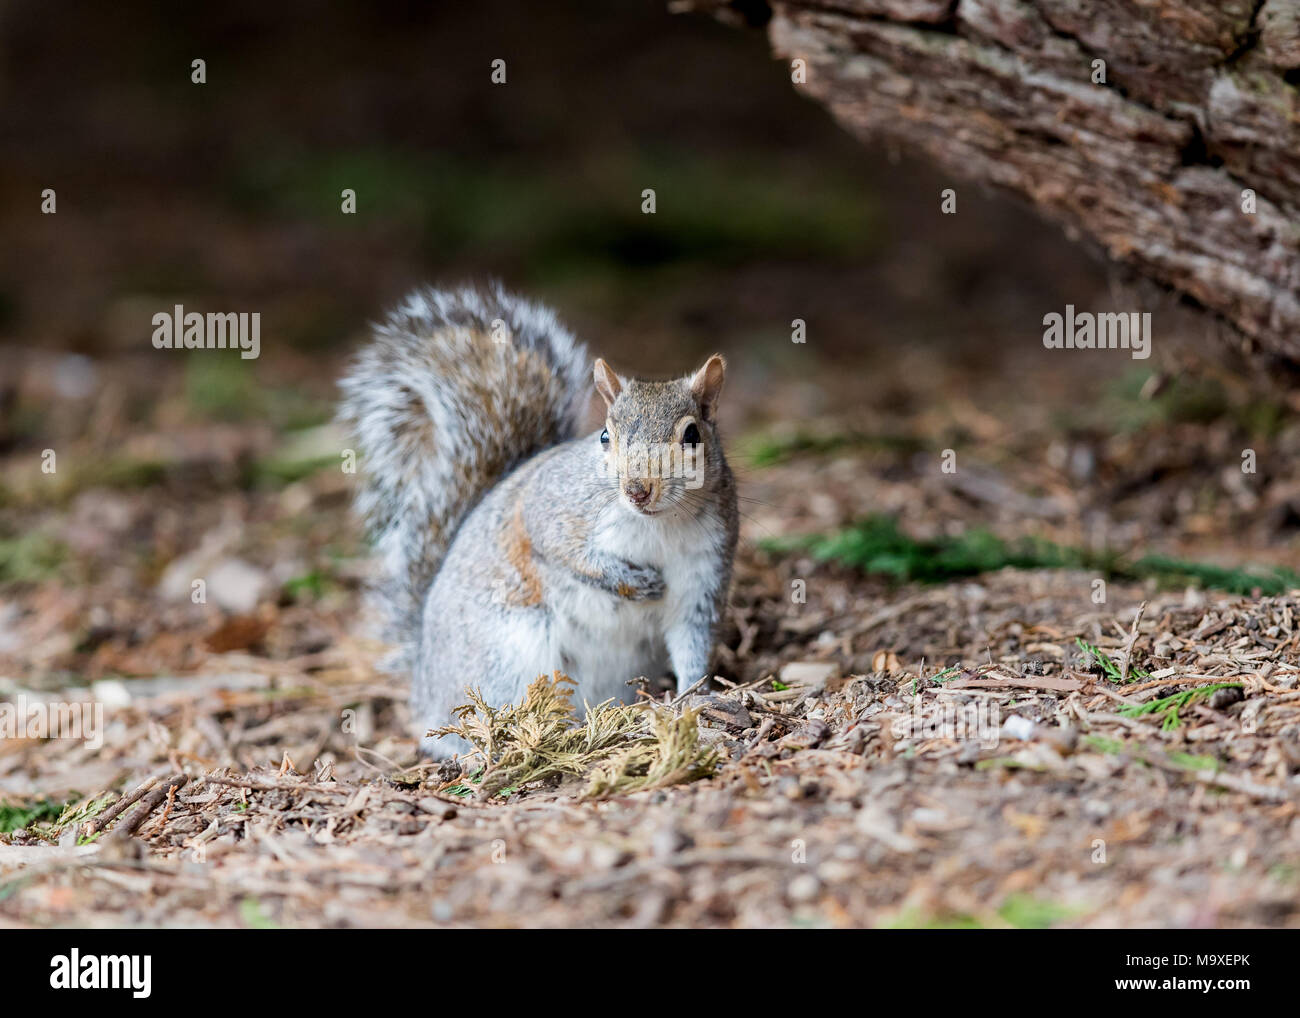 Squirrel eating nut in a tree / Sciuridae / Squirrel with nut Stock Photo